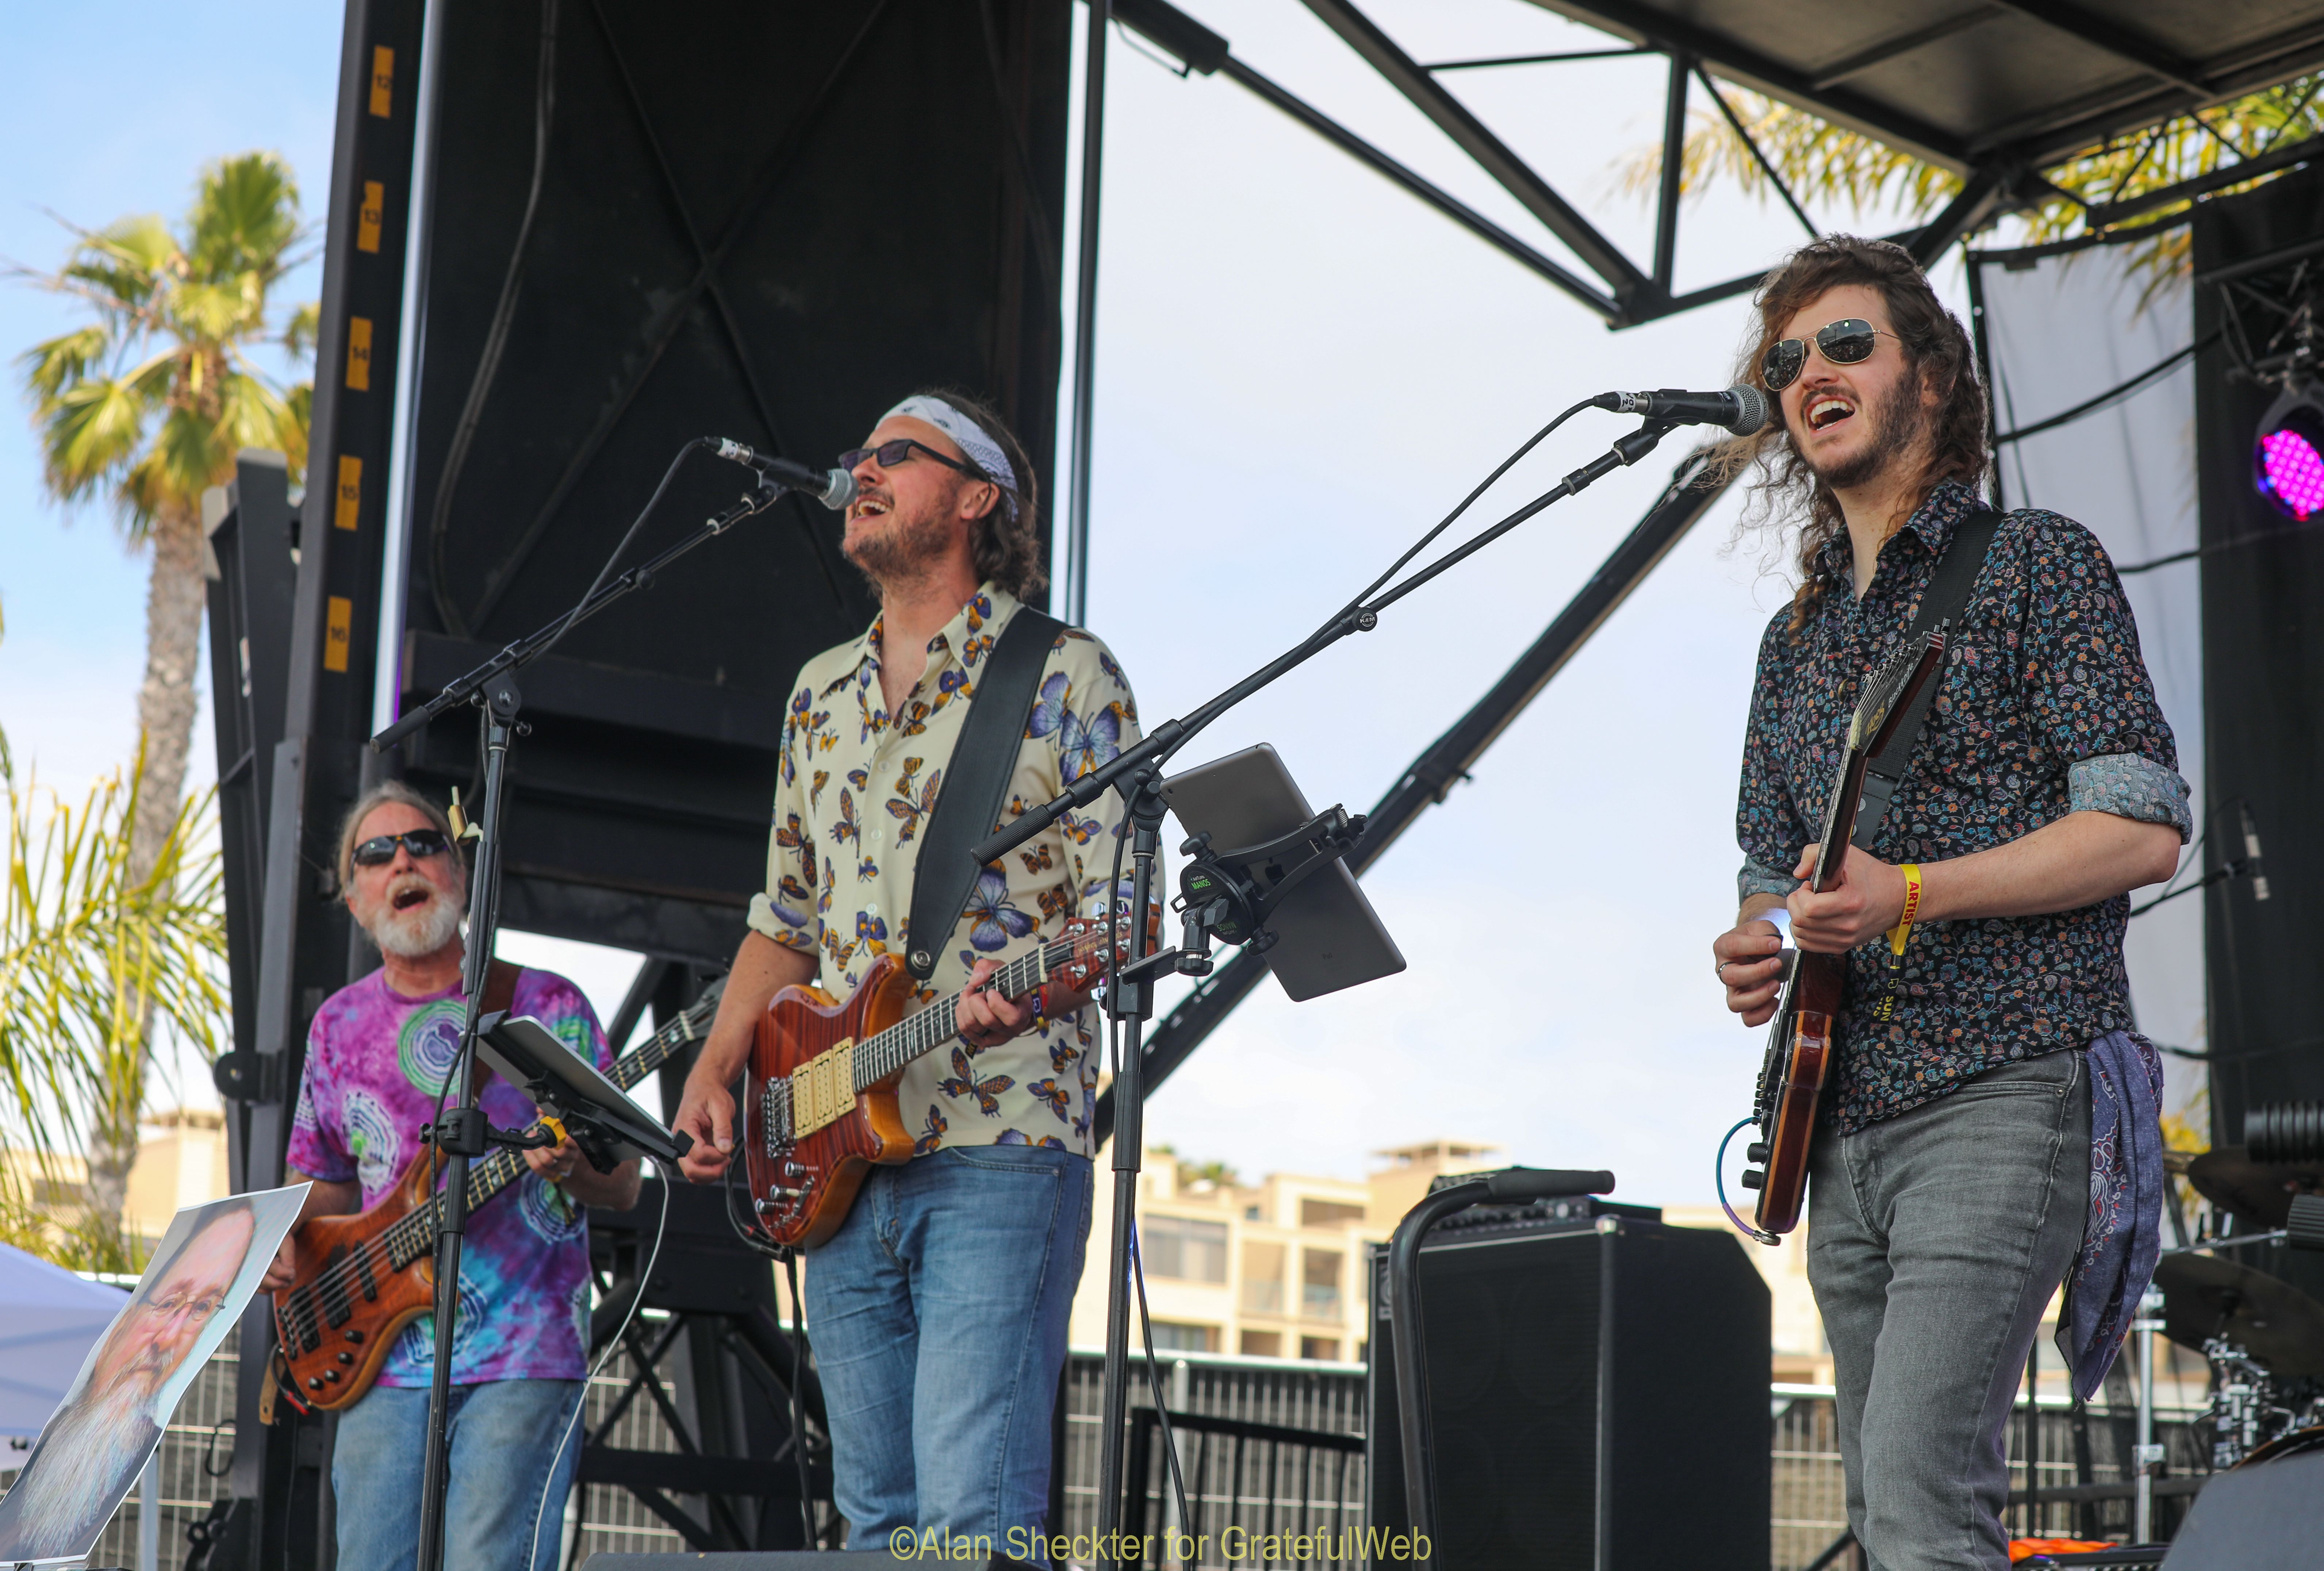 Cubensis’s Larry Ryan (from left), Nate LaPointe,” and Alex Jordan